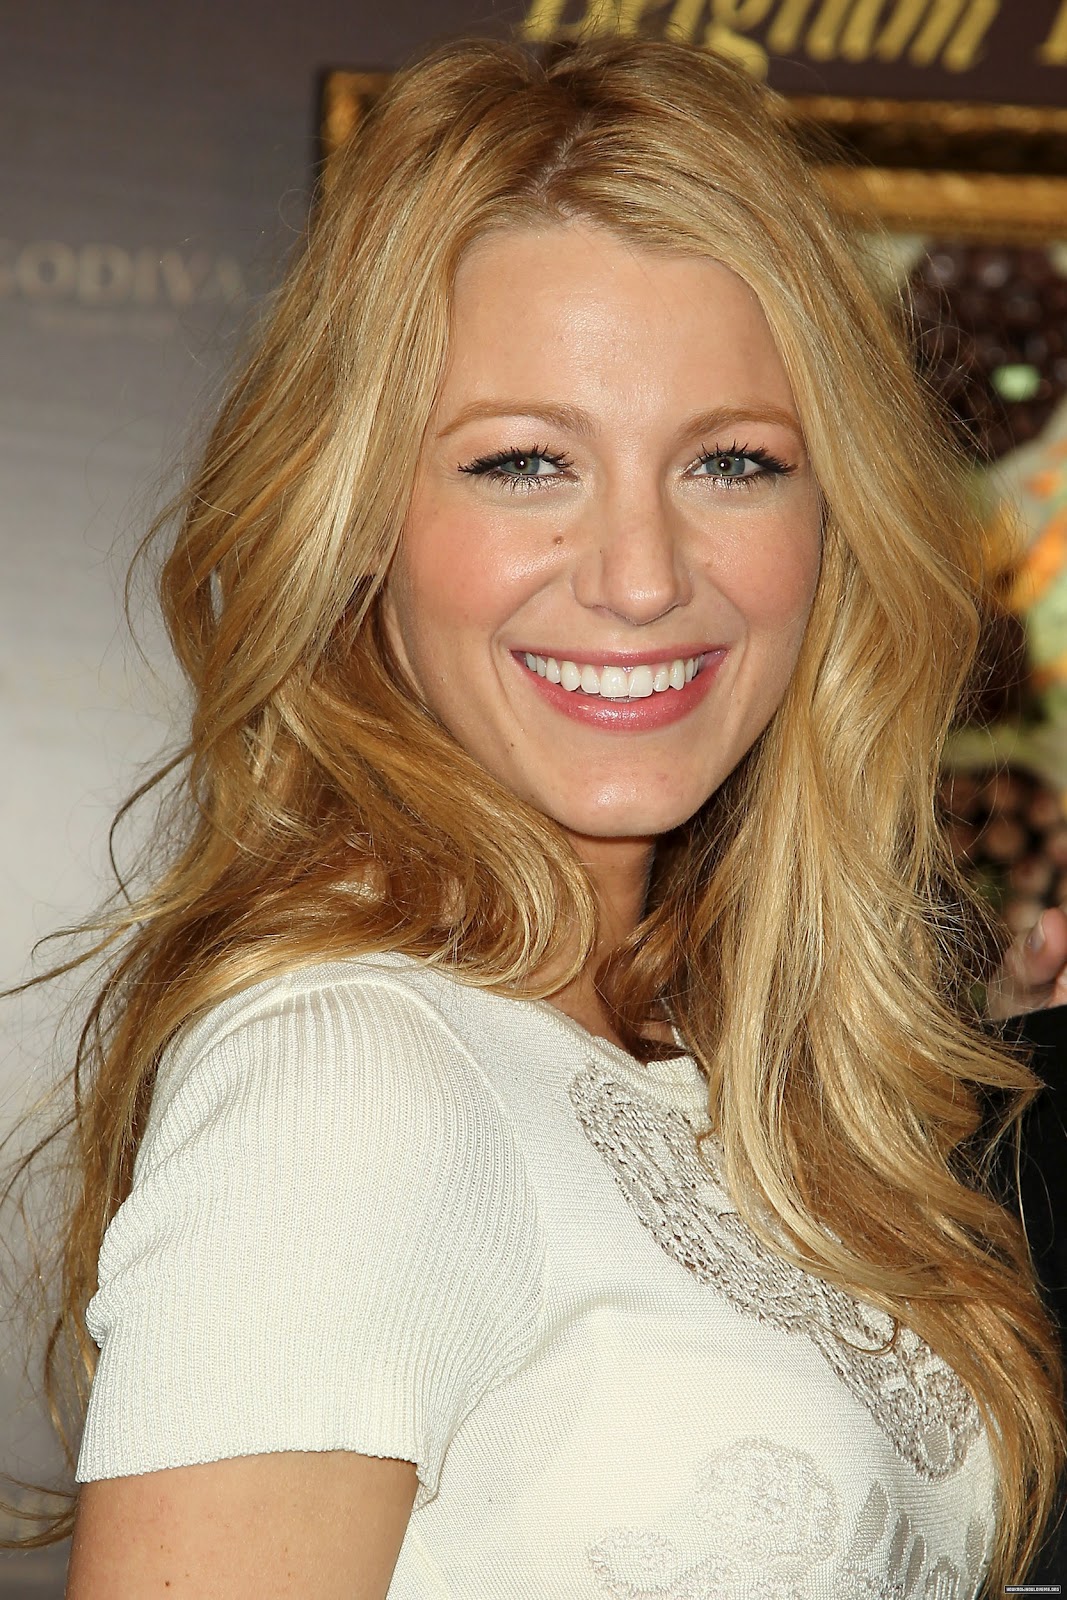 Blake Lively #404891 Wallpapers High Quality | Download Free1067 x 1600